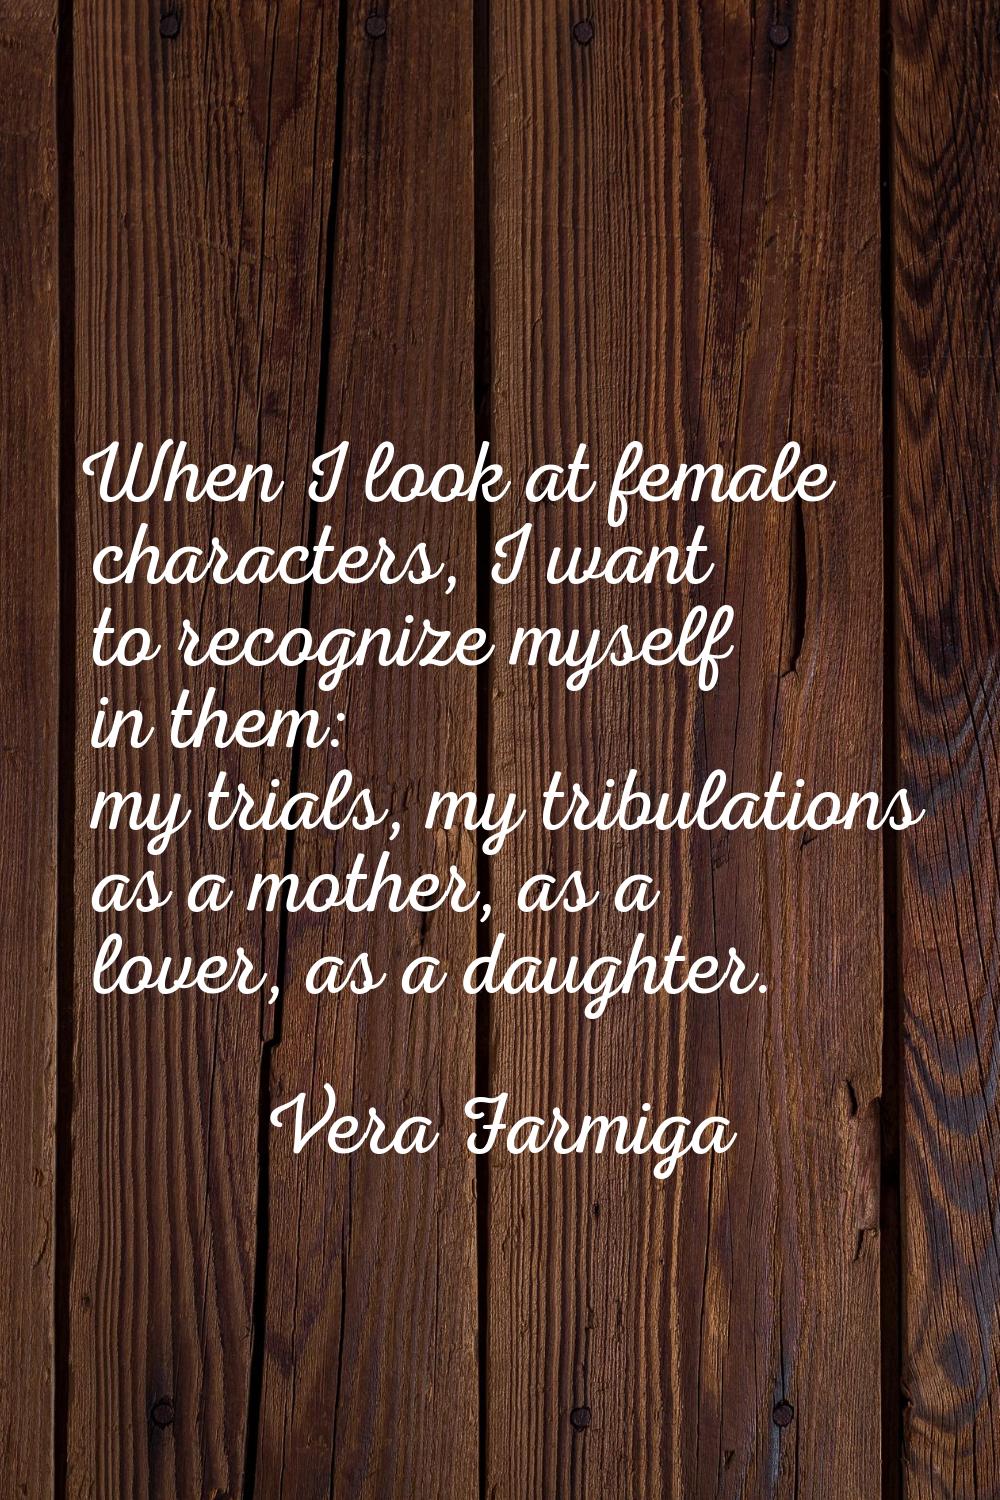 When I look at female characters, I want to recognize myself in them: my trials, my tribulations as